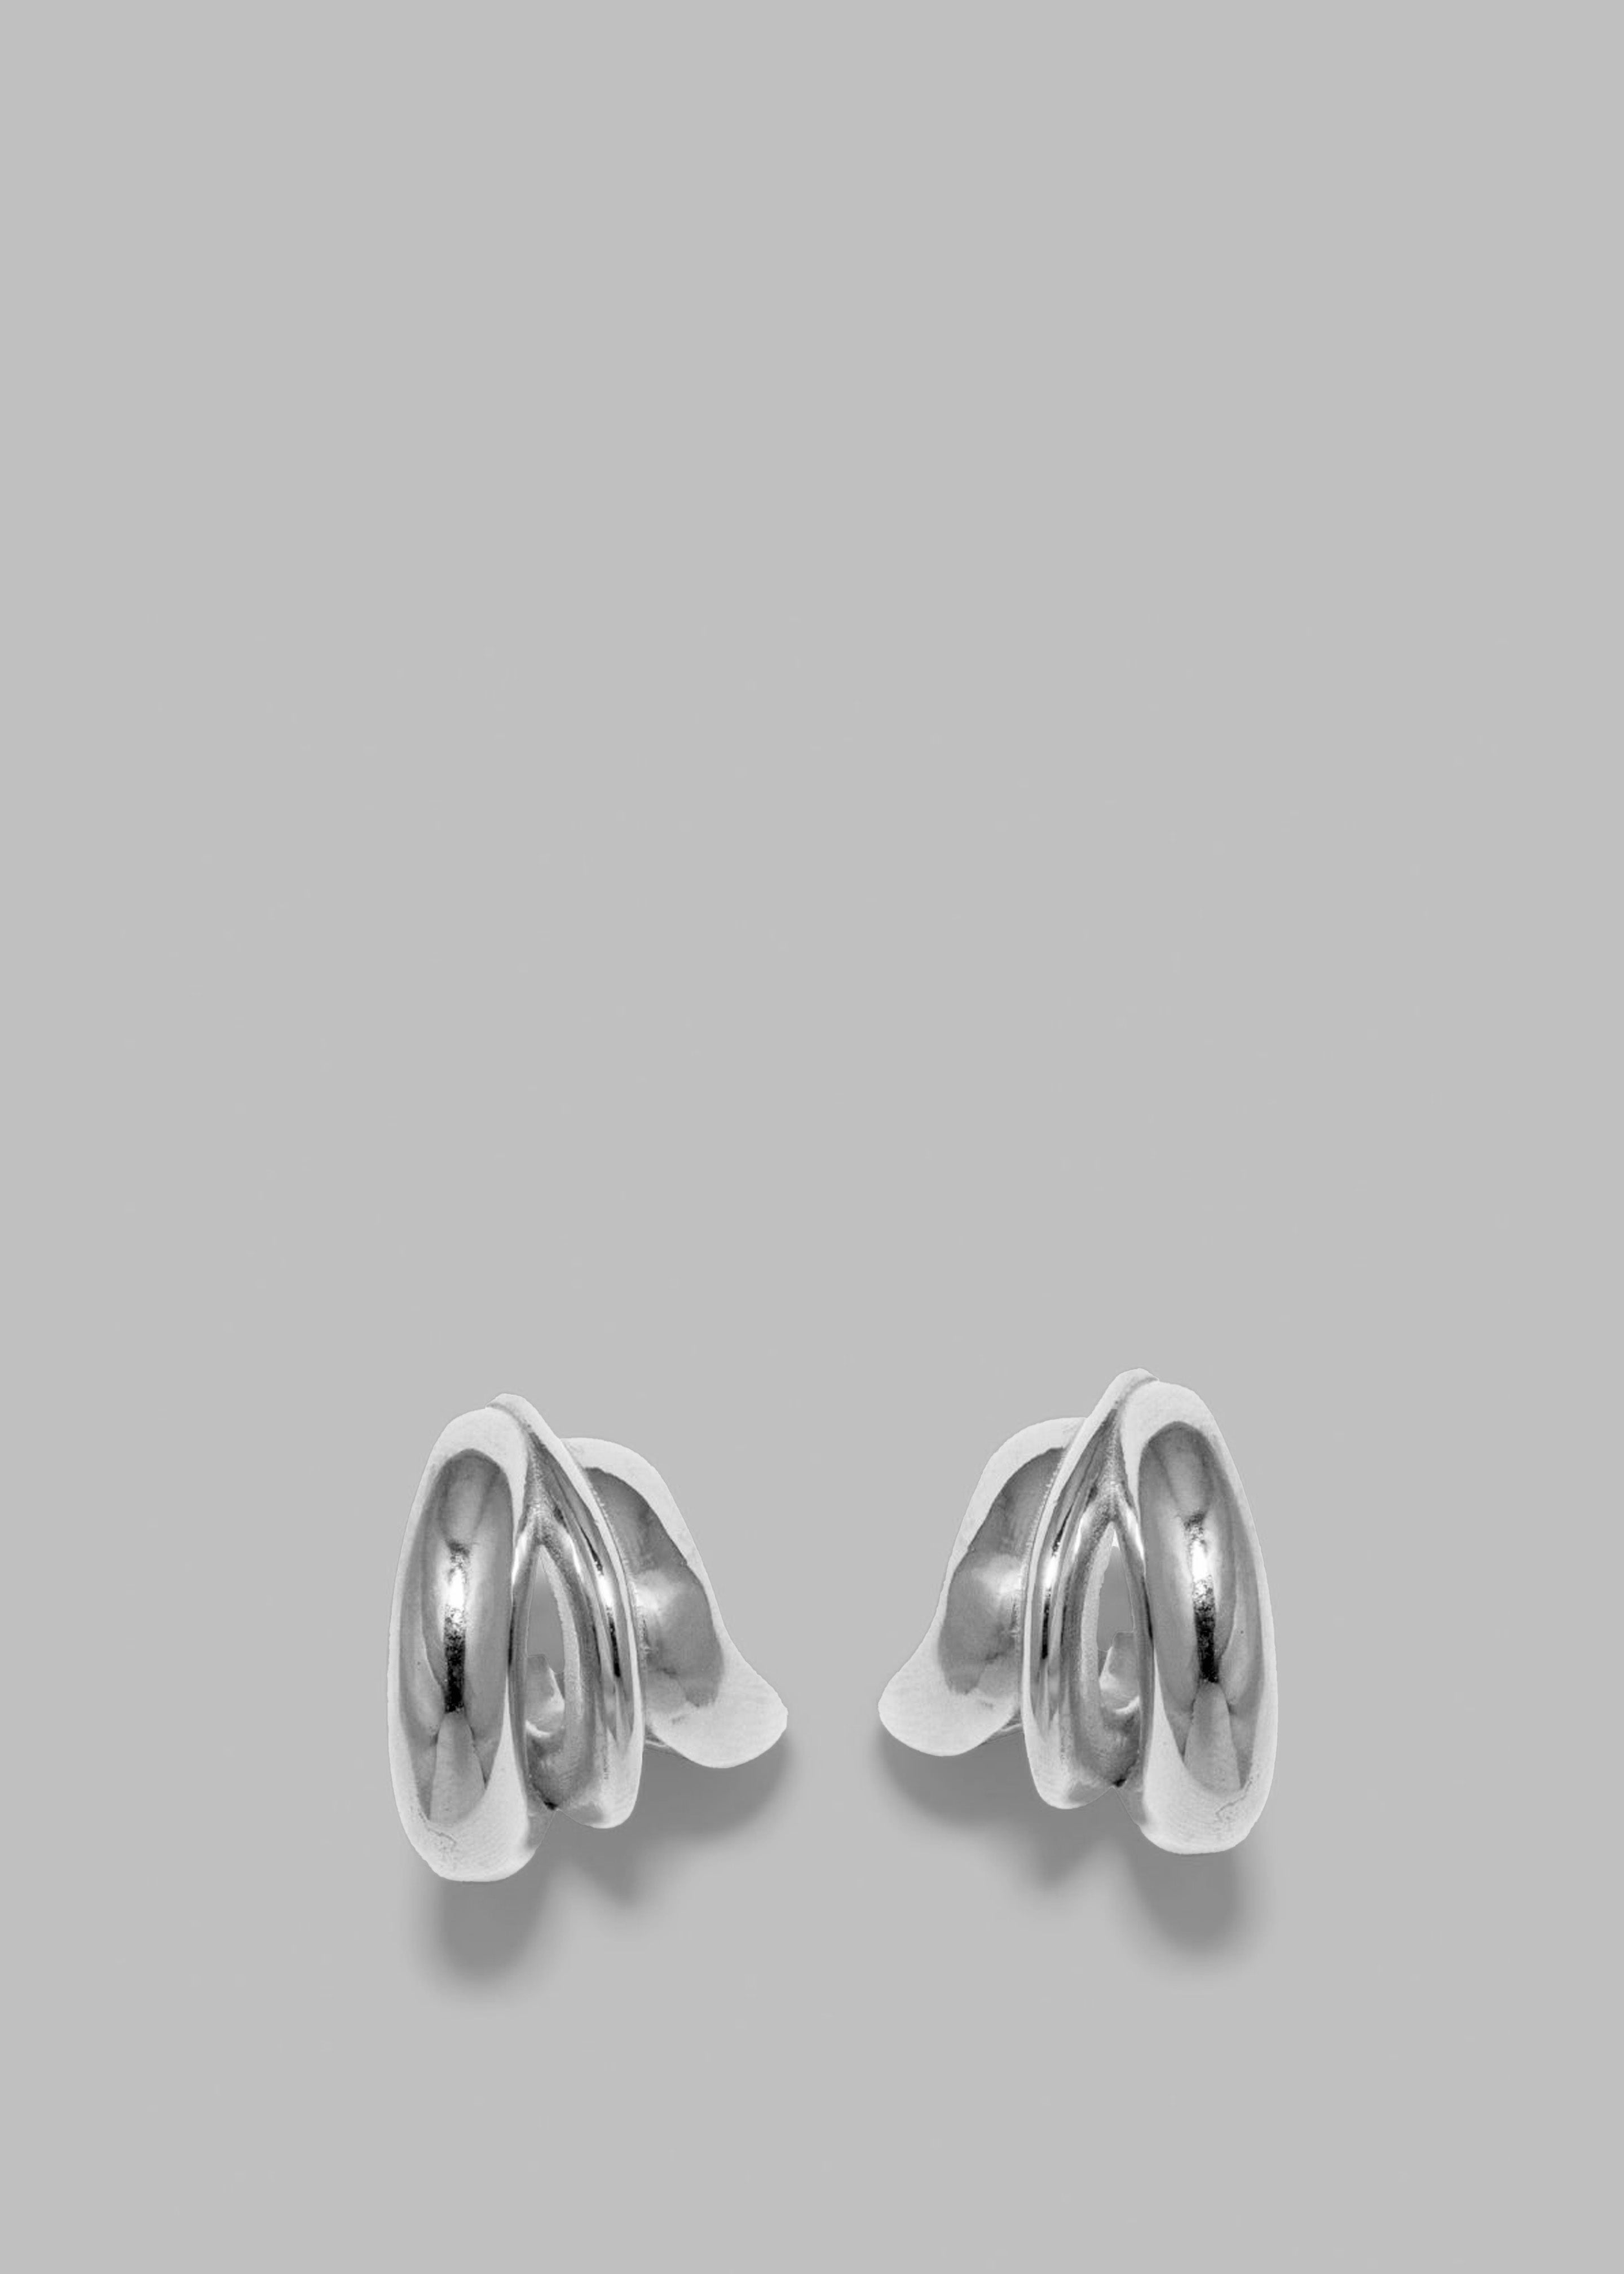 Completedworks The Comeback Kid Earrings - Silver - 2